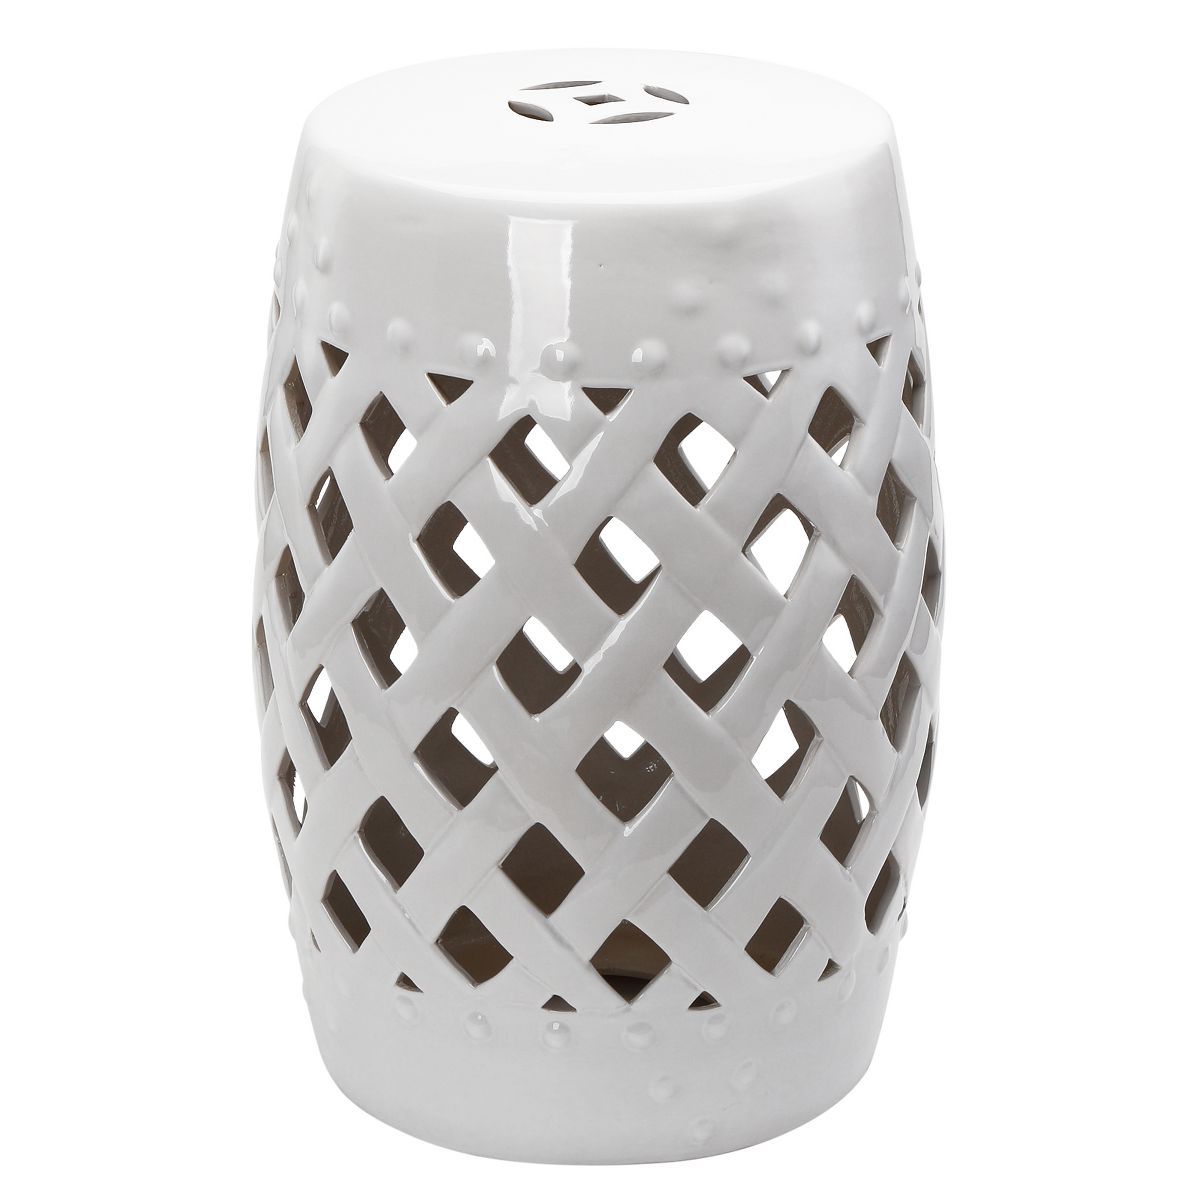 Outsunny 13" x 18" Ceramic Garden Stool with Woven Lattice Design & Glazed Strong Materials | Target